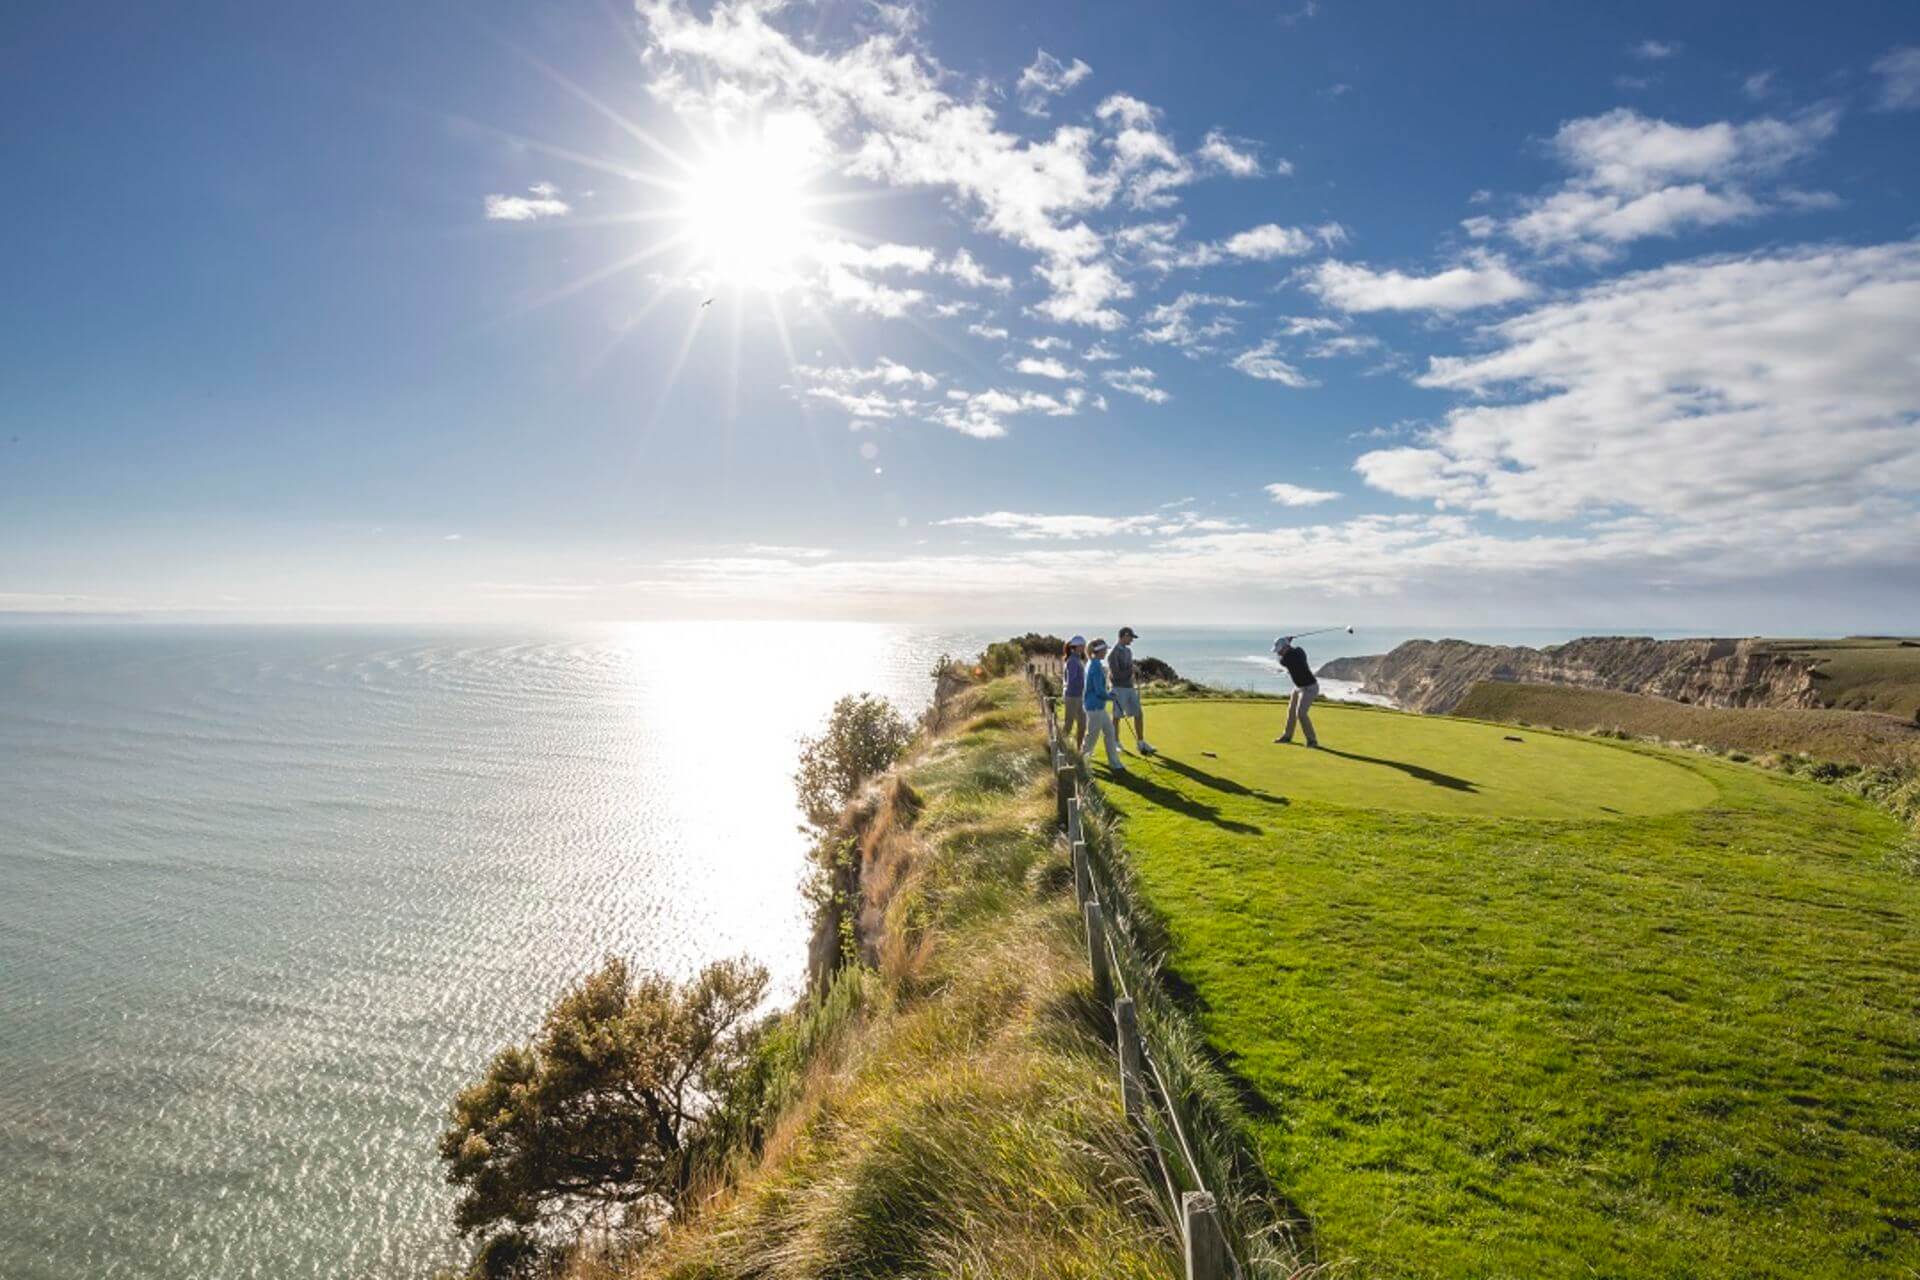 Cape kidnappers 10